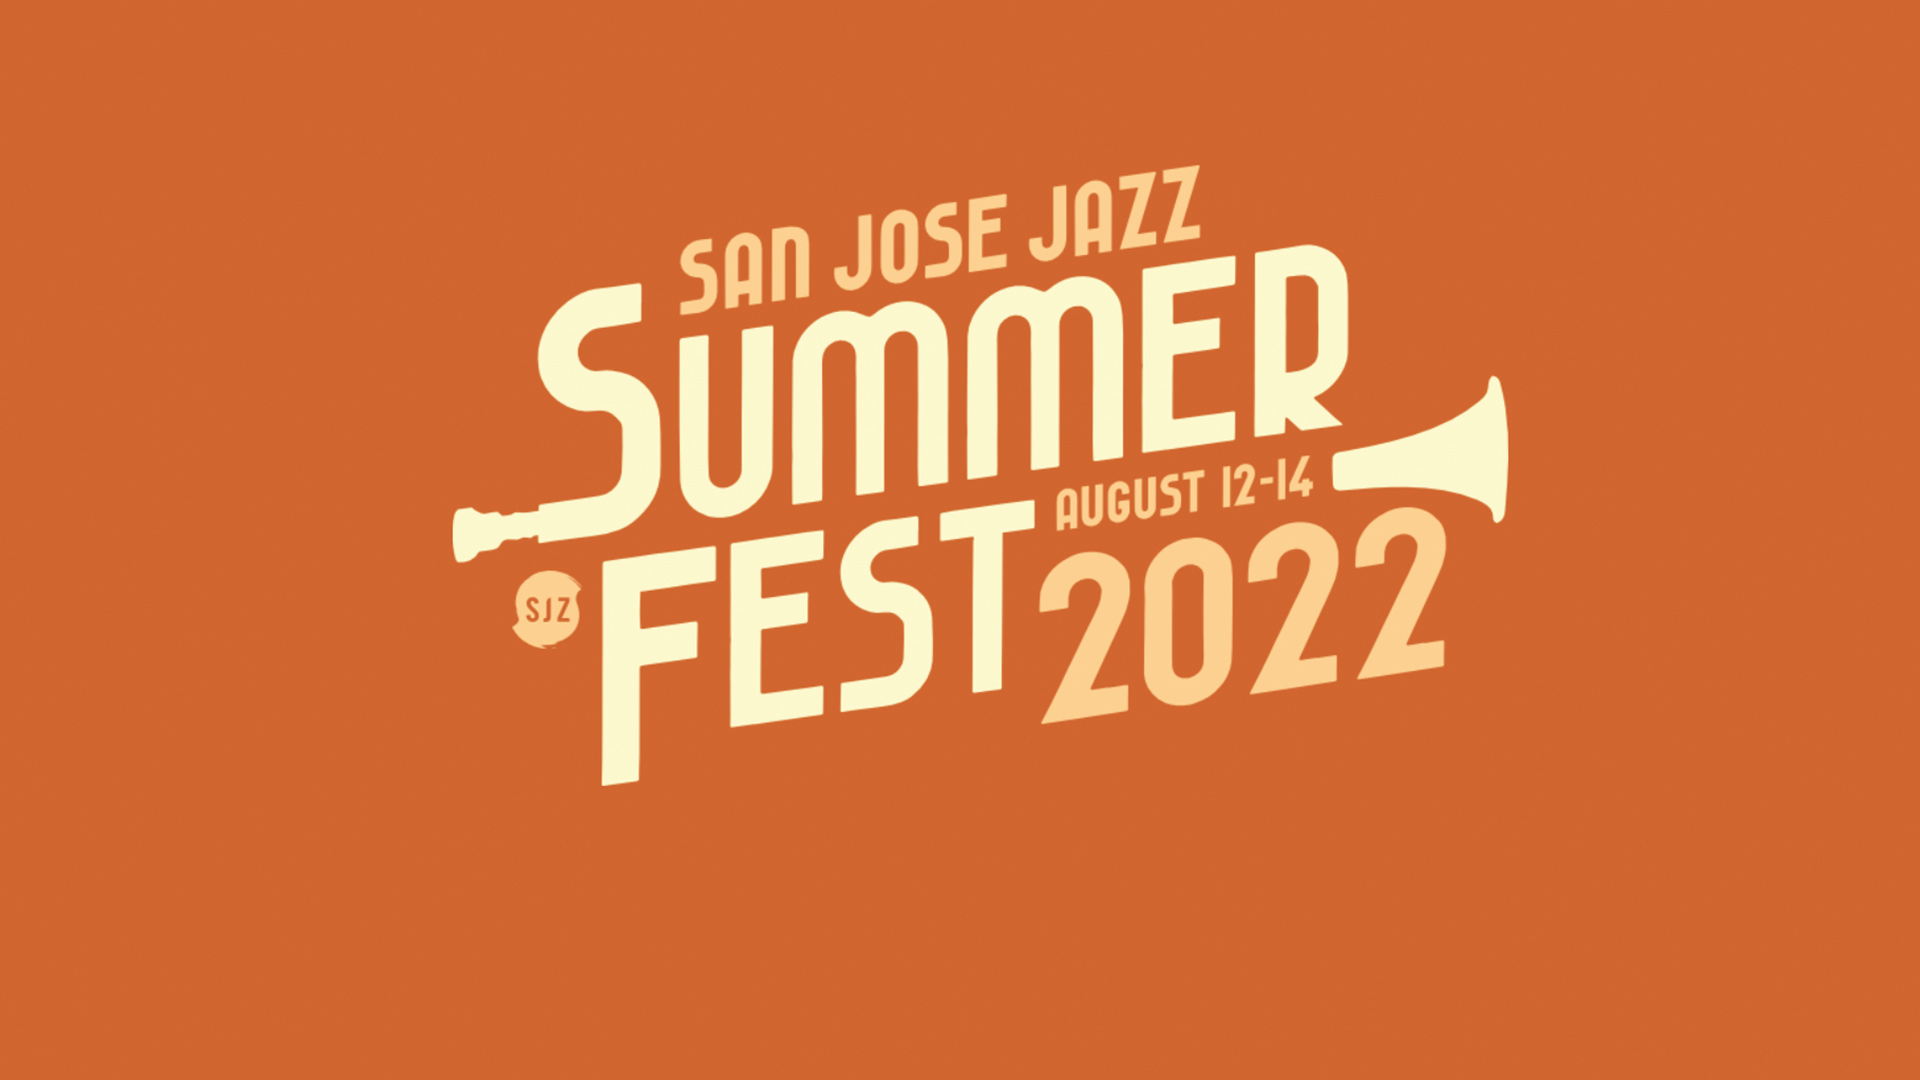 San Jose Jazz Summer Fest is Back News UpNOW Arts, Community and